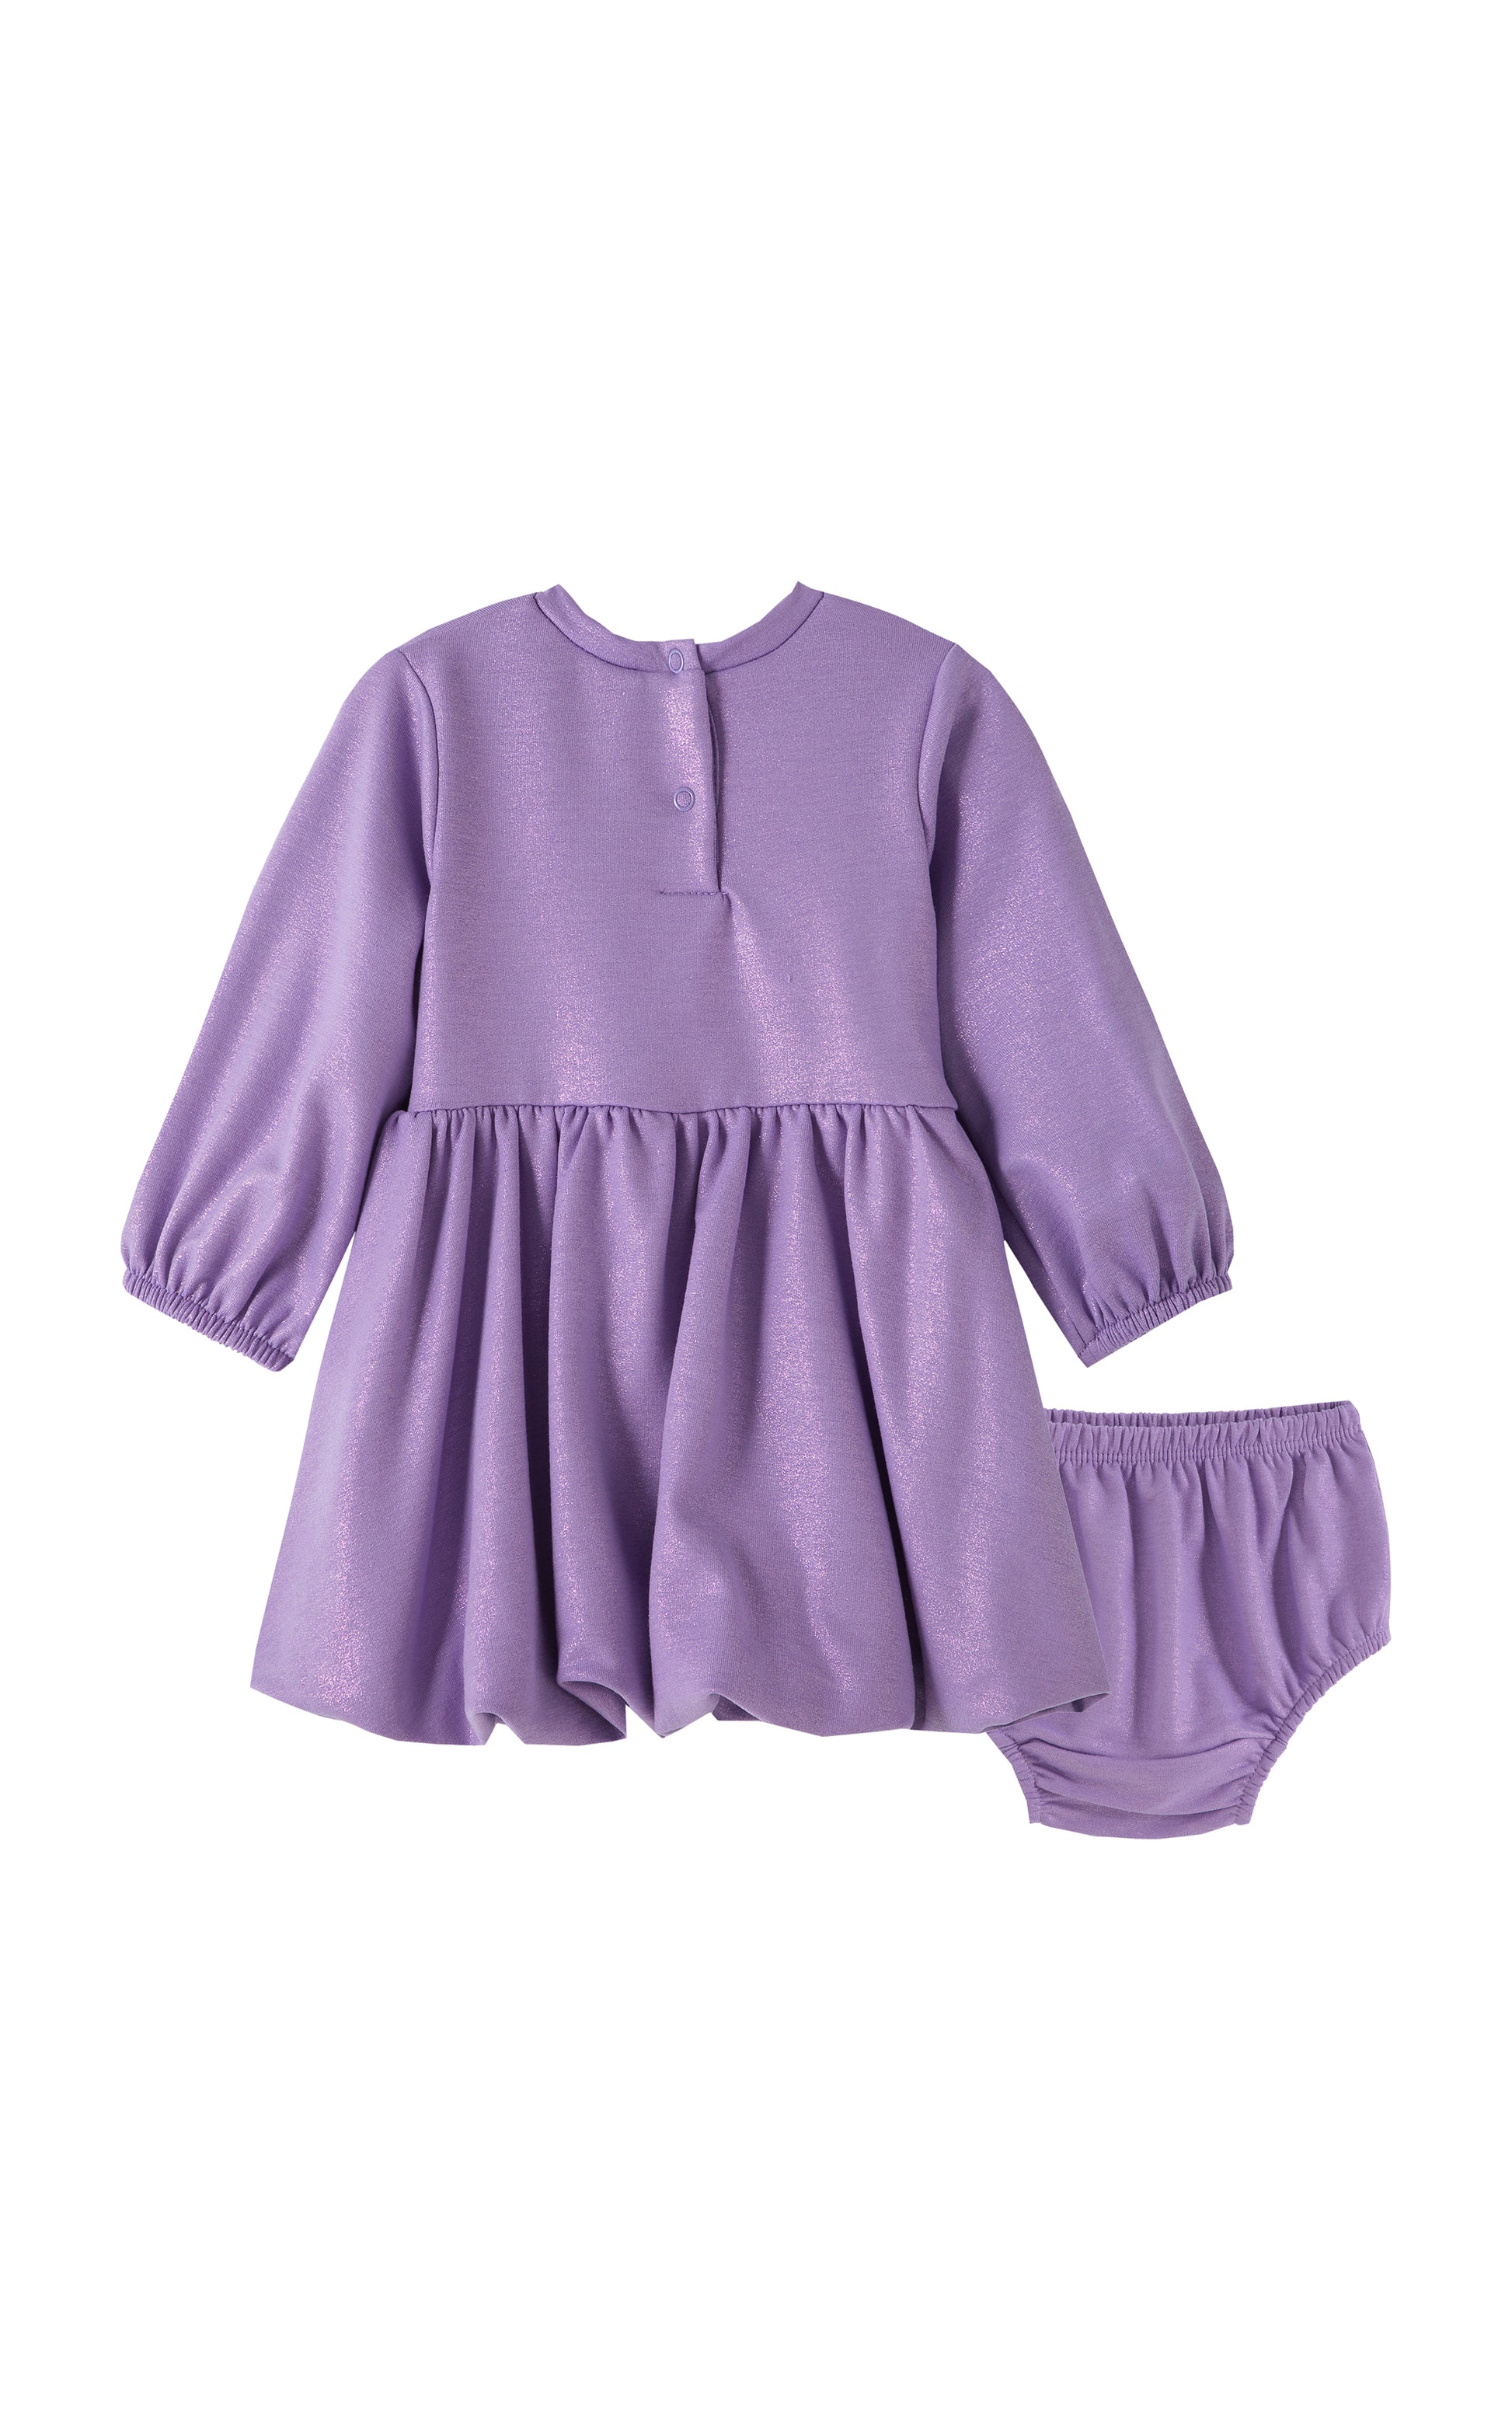 BACK OF METALLIC PURPLE BUBBLE DRESS WITH BOW AND MATCHING BLOOMERS